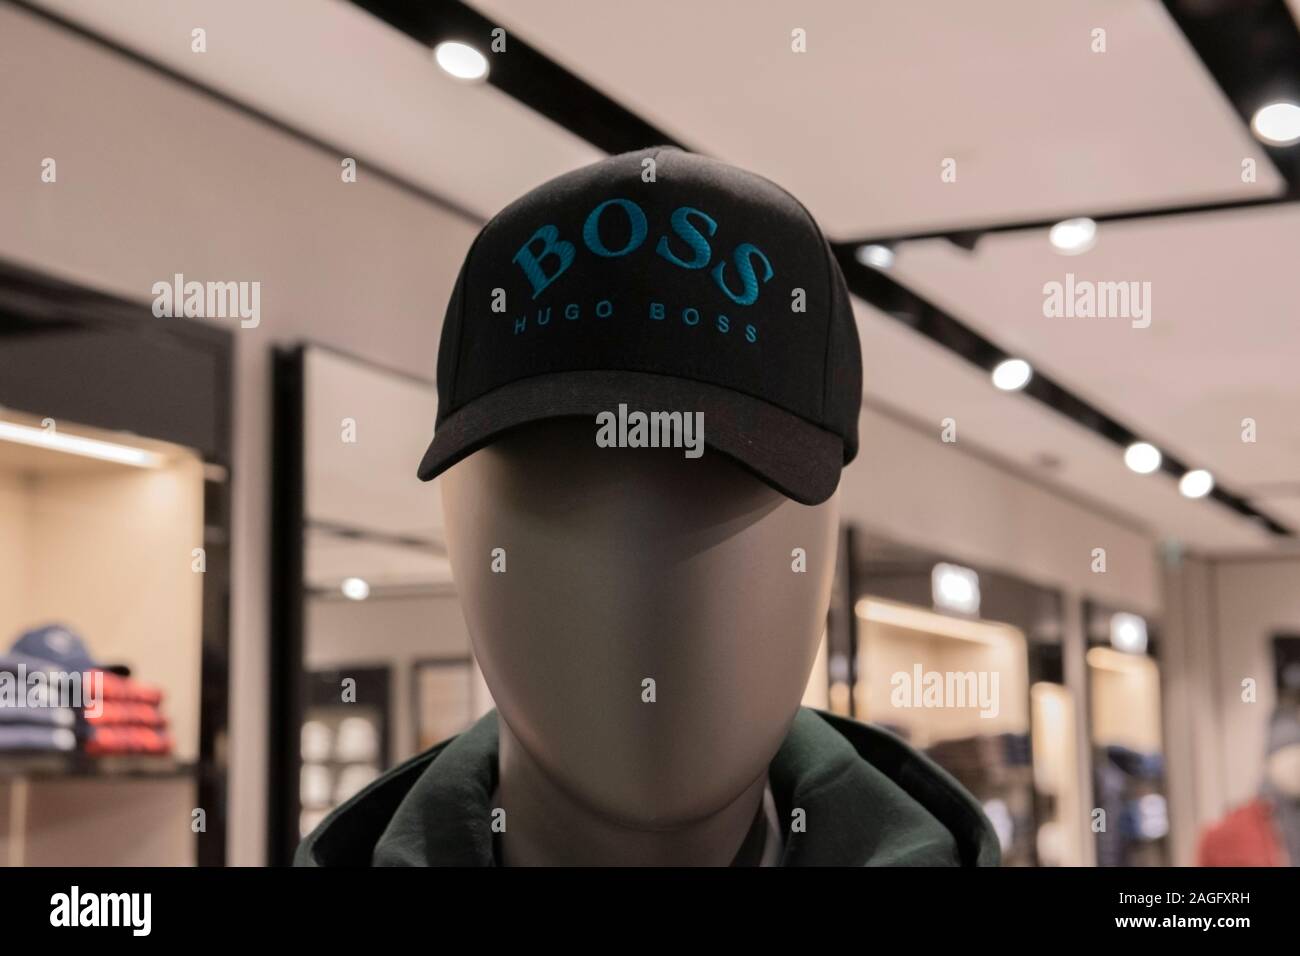 Selling Hugo Boss Cap At Schiphol Airport The Netherlands 2019 Stock ...